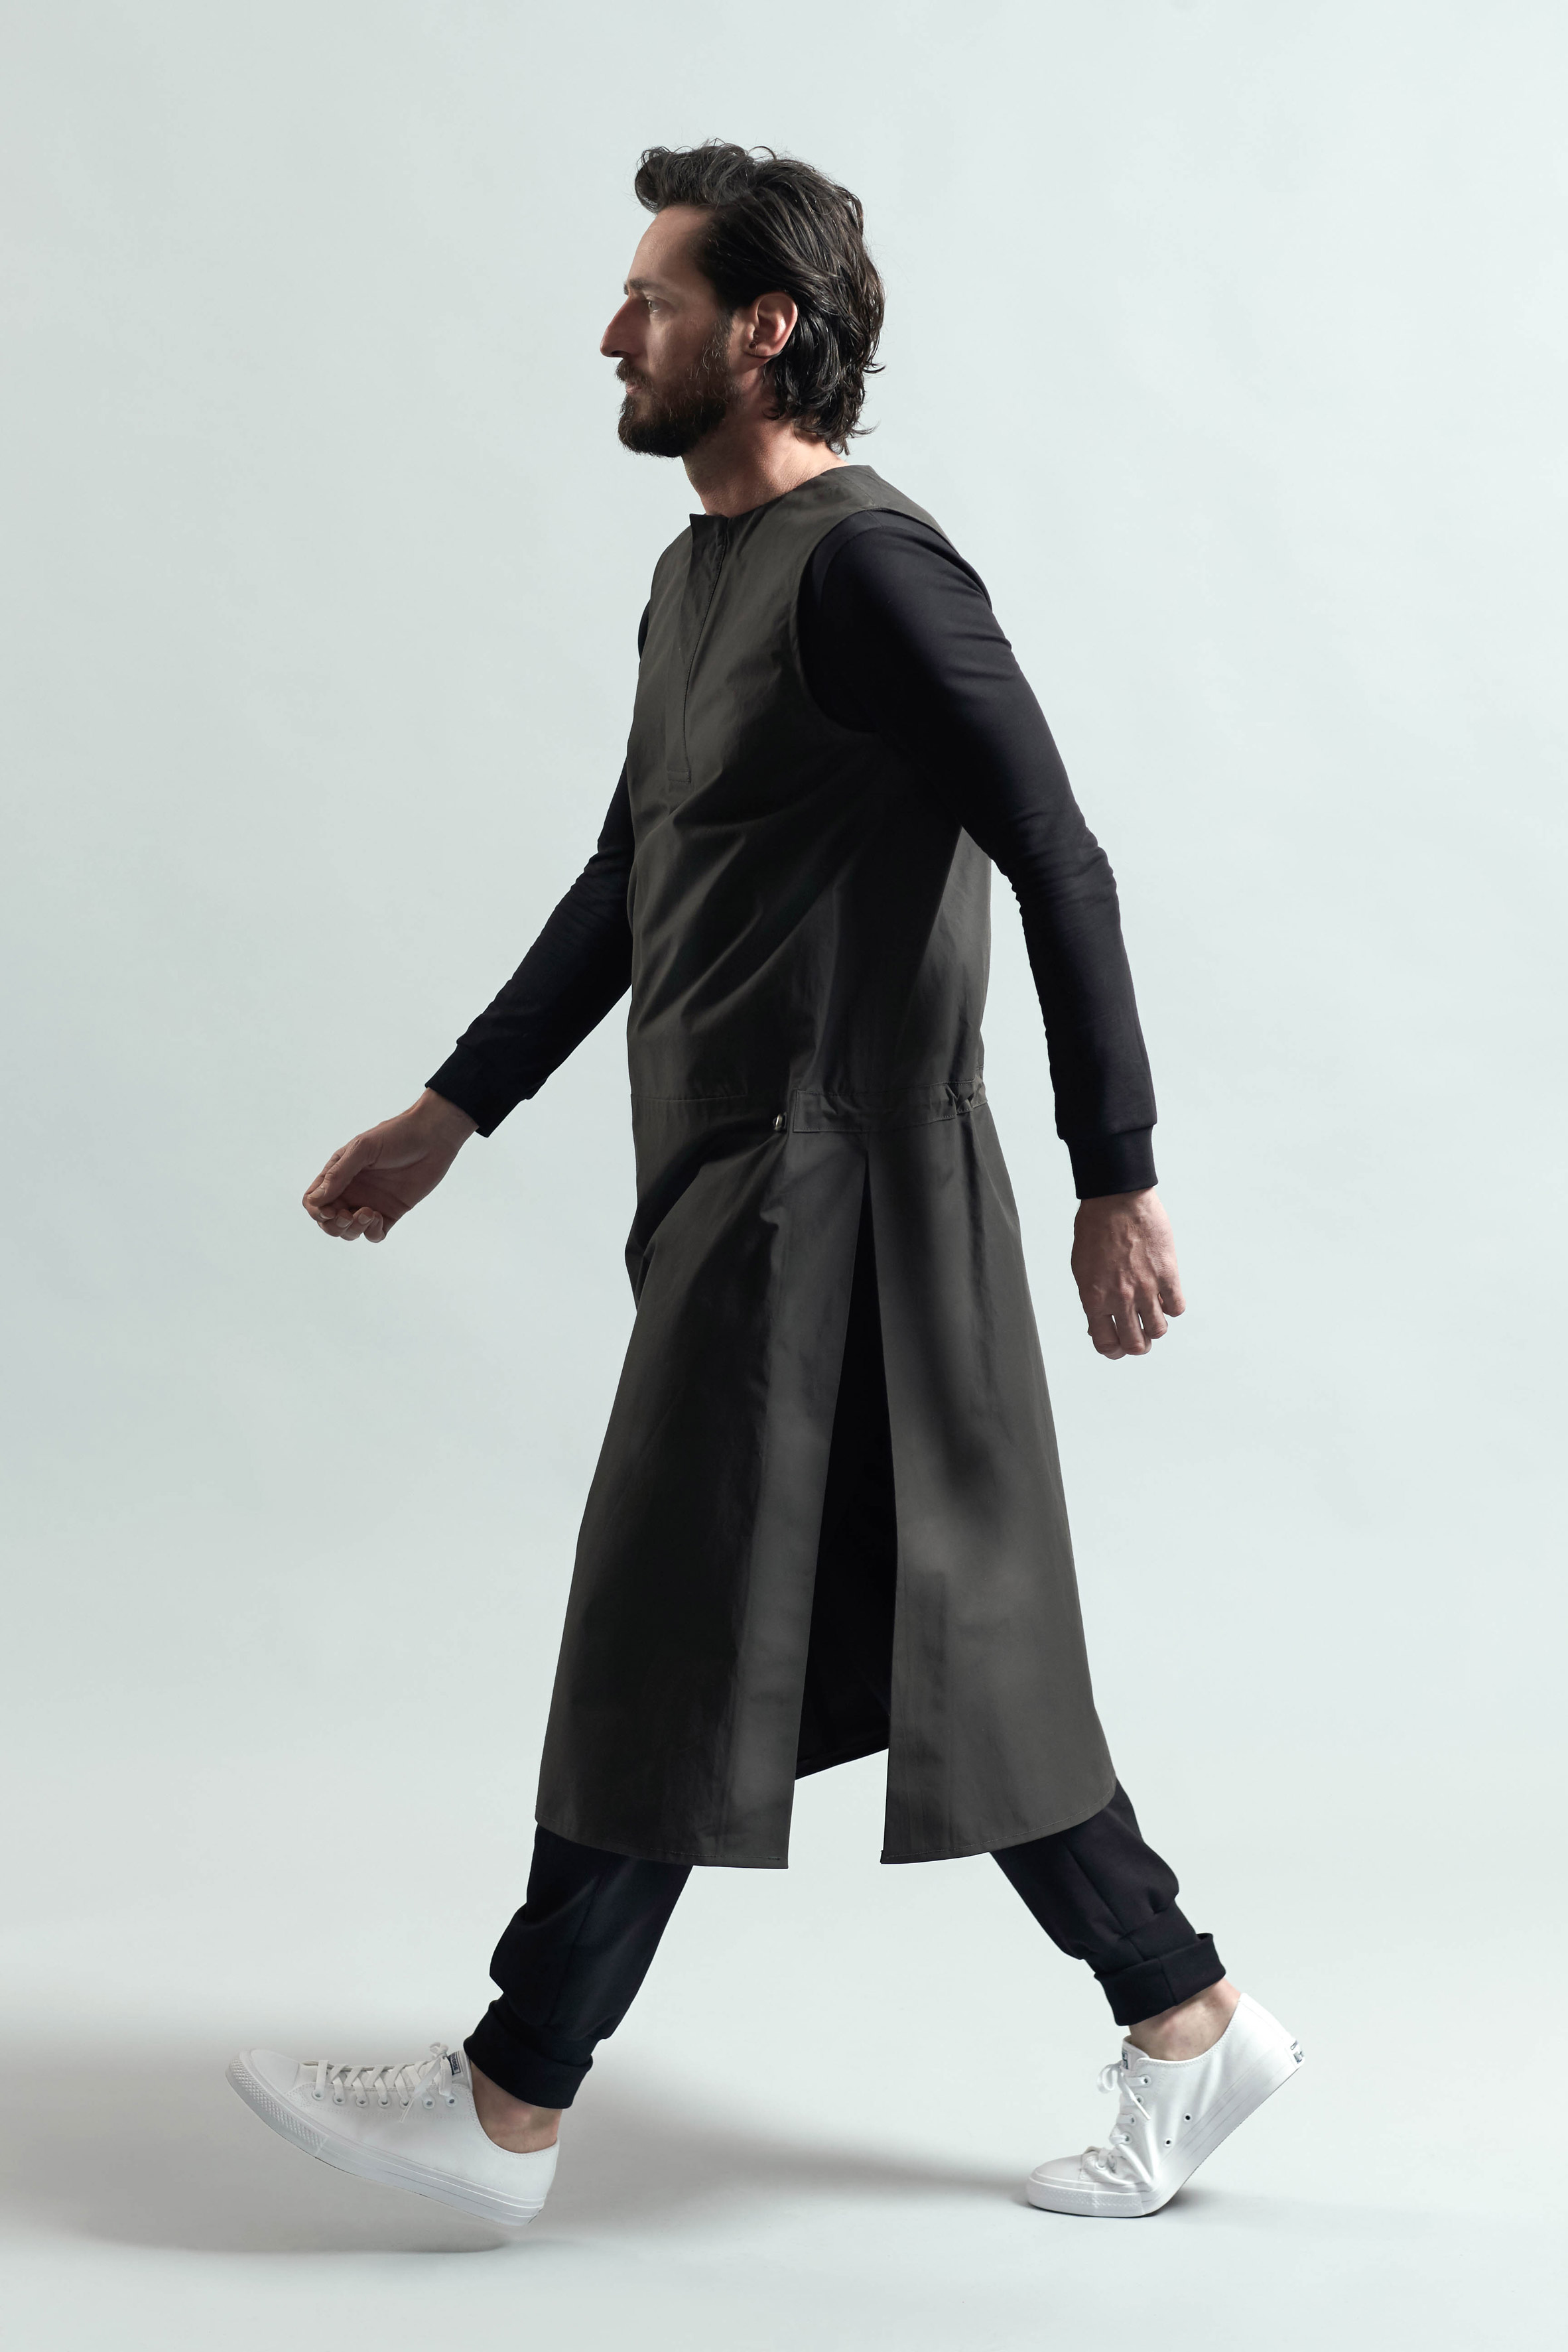 the-new-habit-clothes-inspired-dominican-monks-byborre-design-fashion_dezeen_2364_col_2